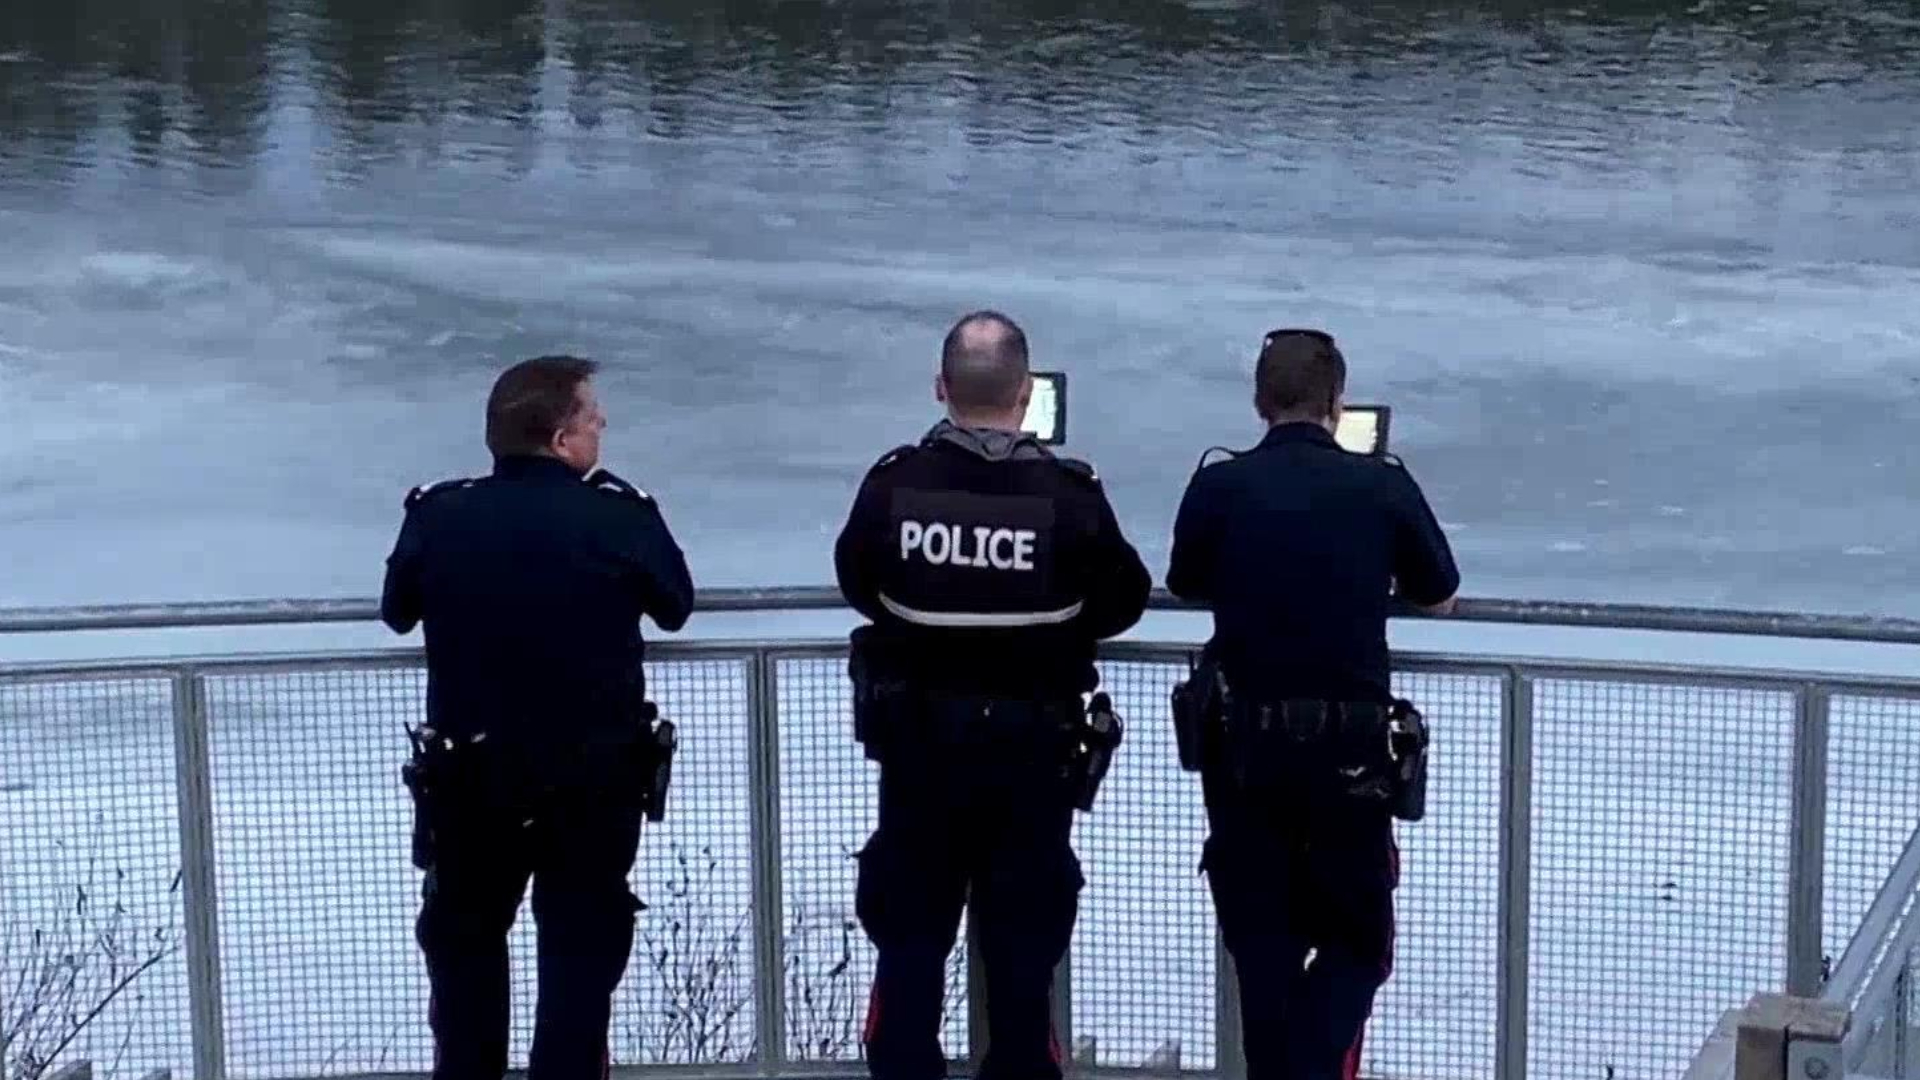 Edmonton firefighers search for woman who fell in the river